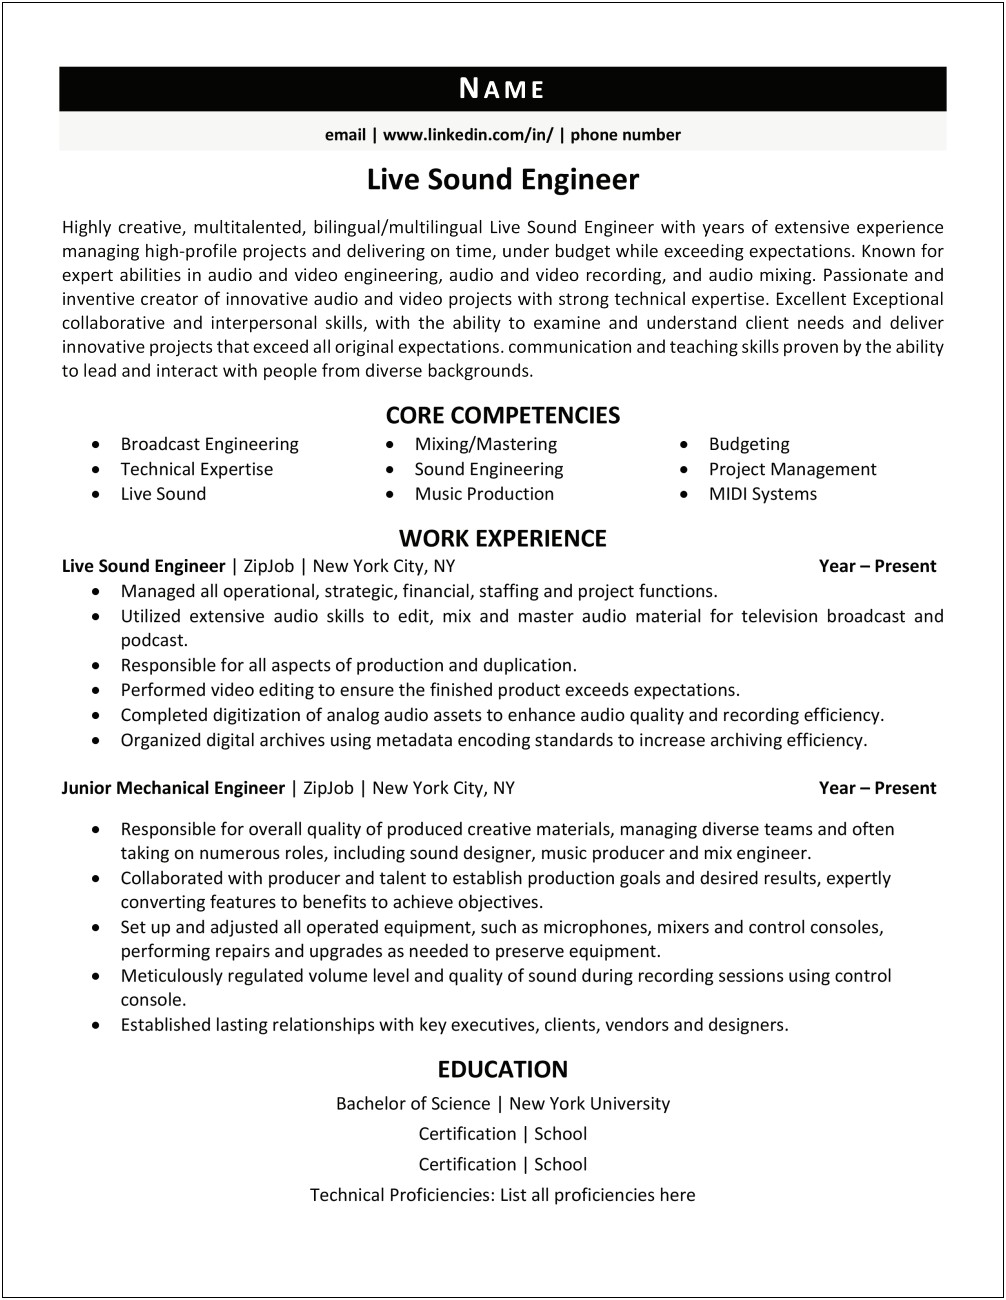 Resume Exampler For A Music Producer